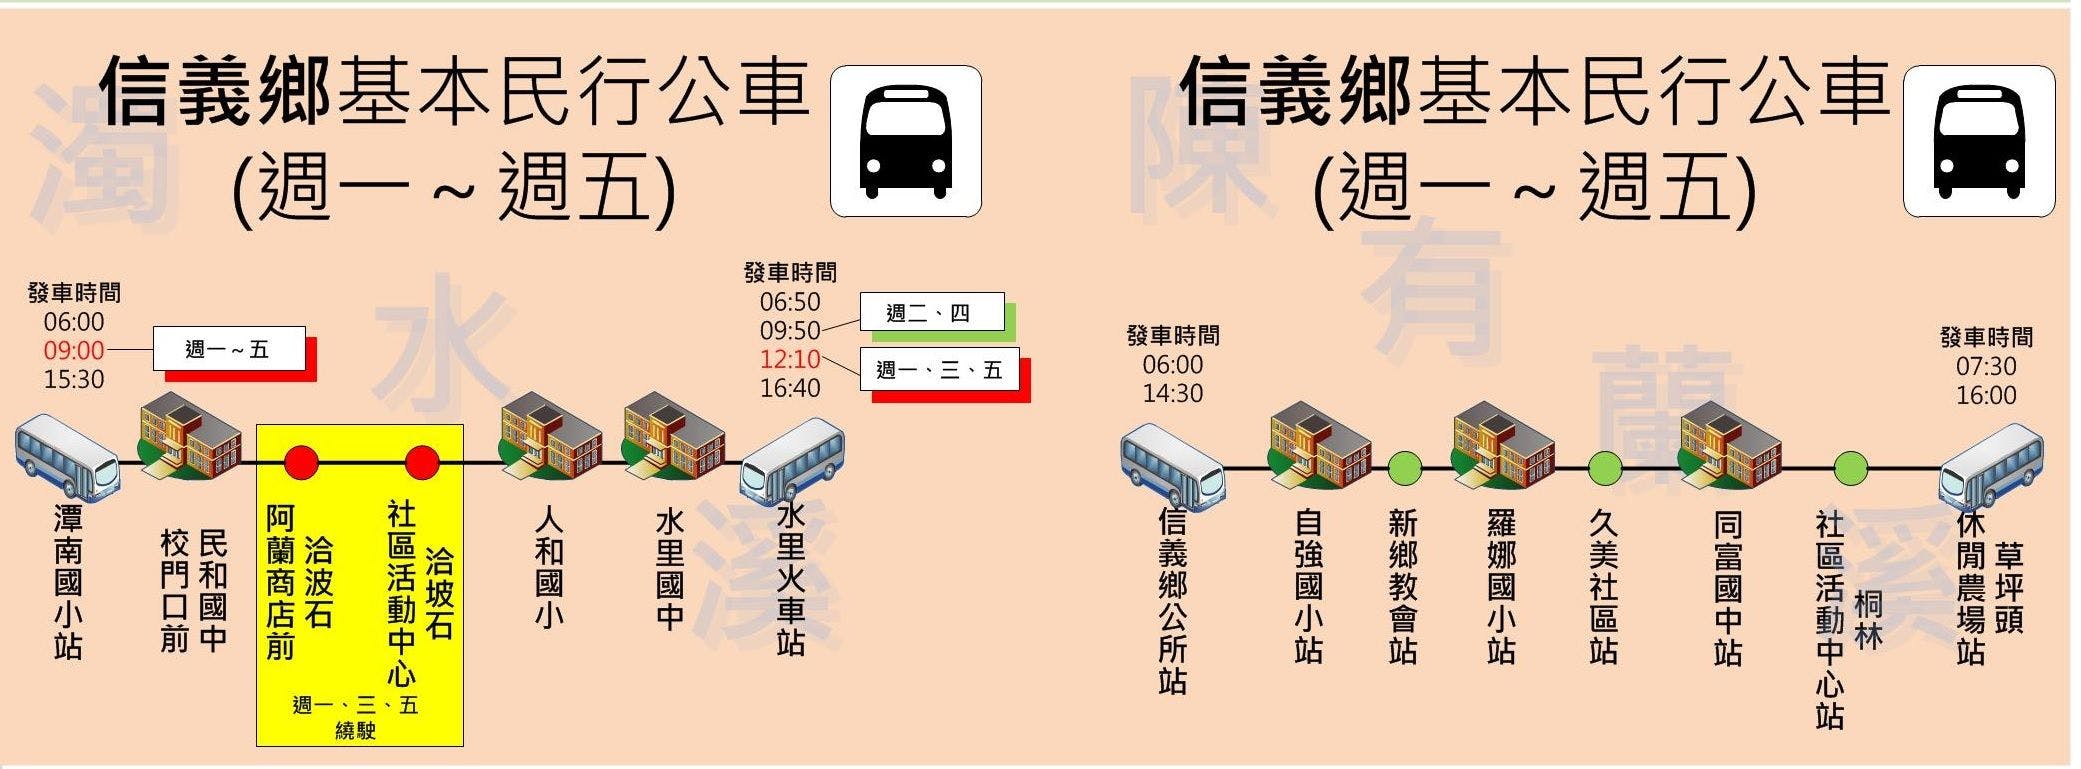 0561Route Map-南投 Bus